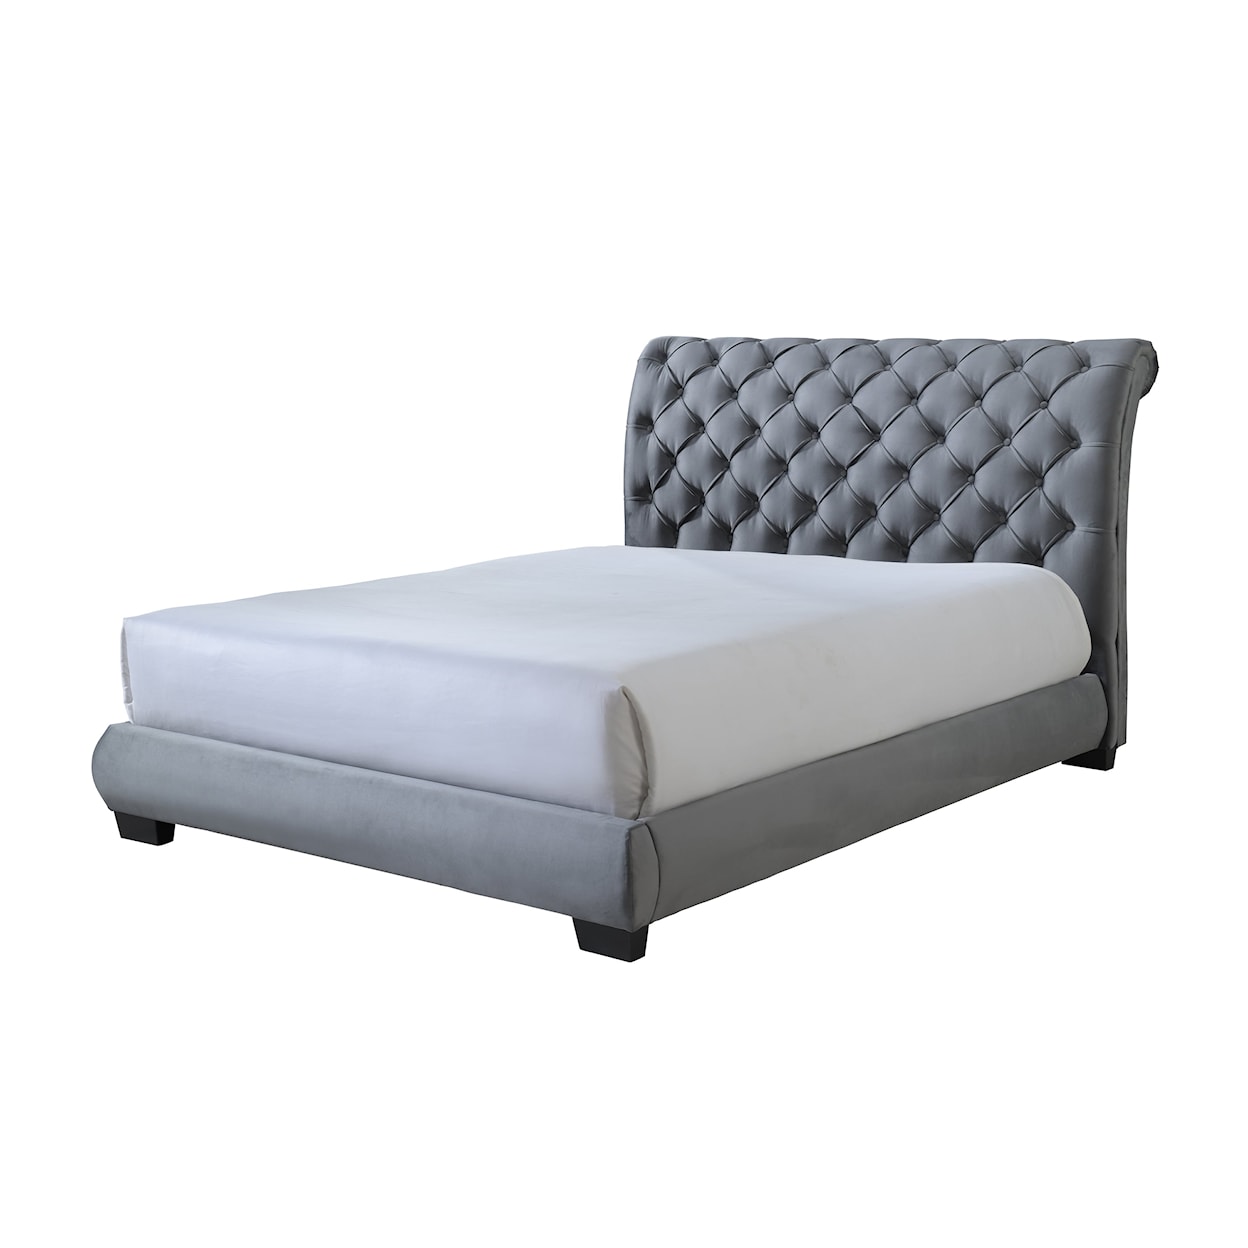 Crown Mark Carly CARSTON GREY QUEEN BED |